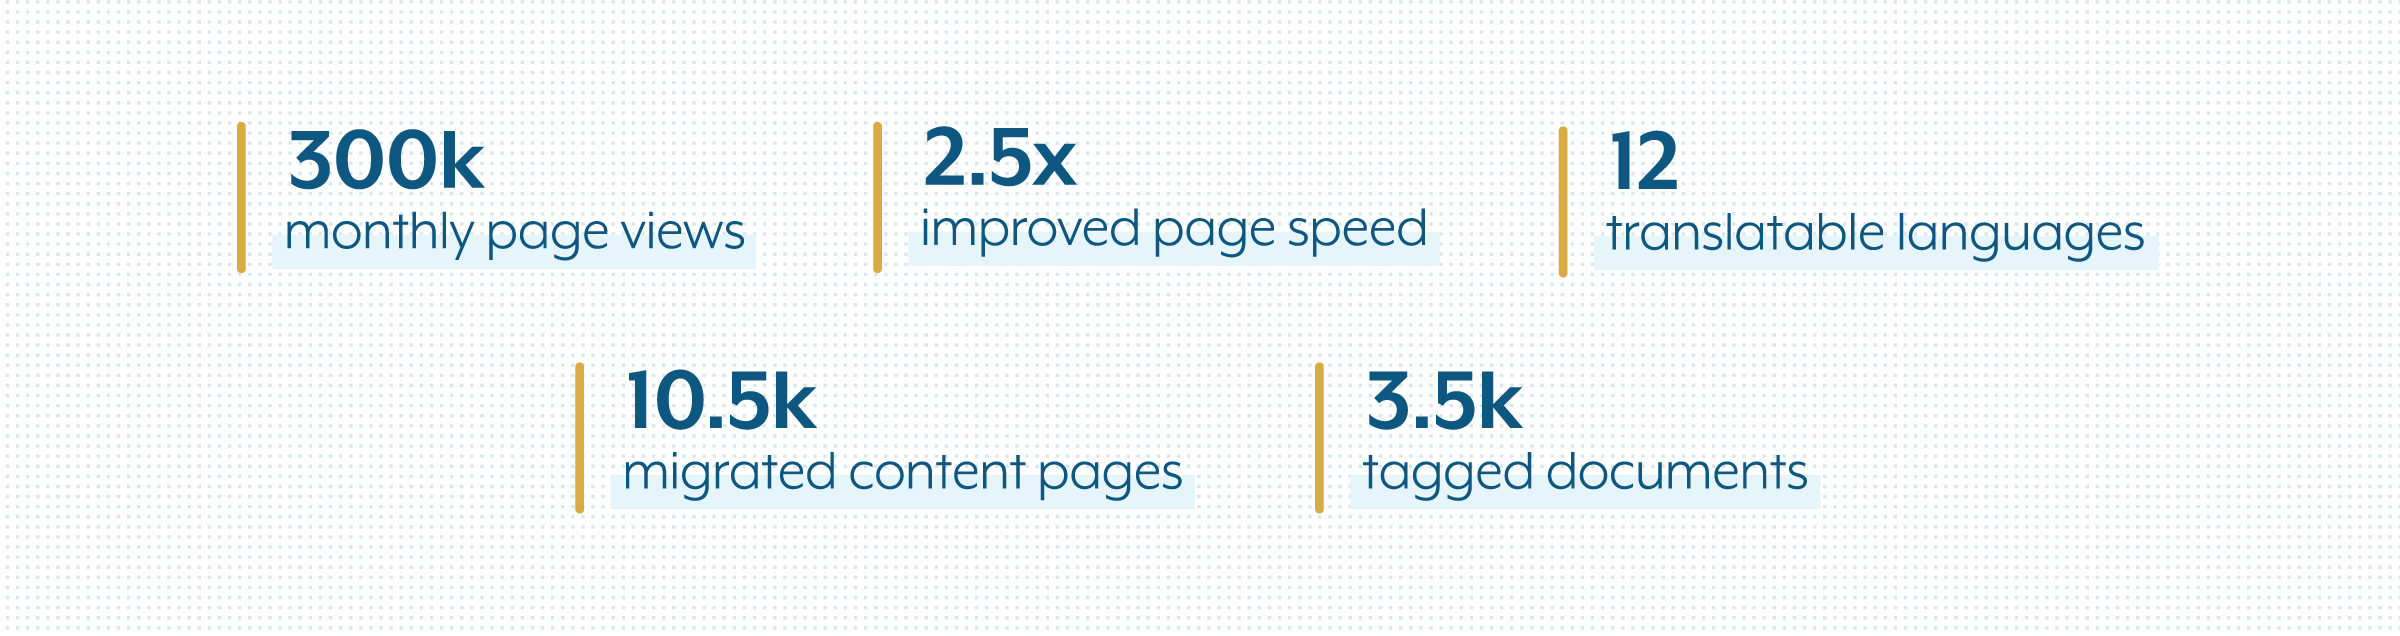 6 statistics laid out in a grid, mentioning 300k monthly page views, 2.5x improved page speed, 12 translatable langauges, 10k pages of content migrated, and 3.5k documents tagged. 